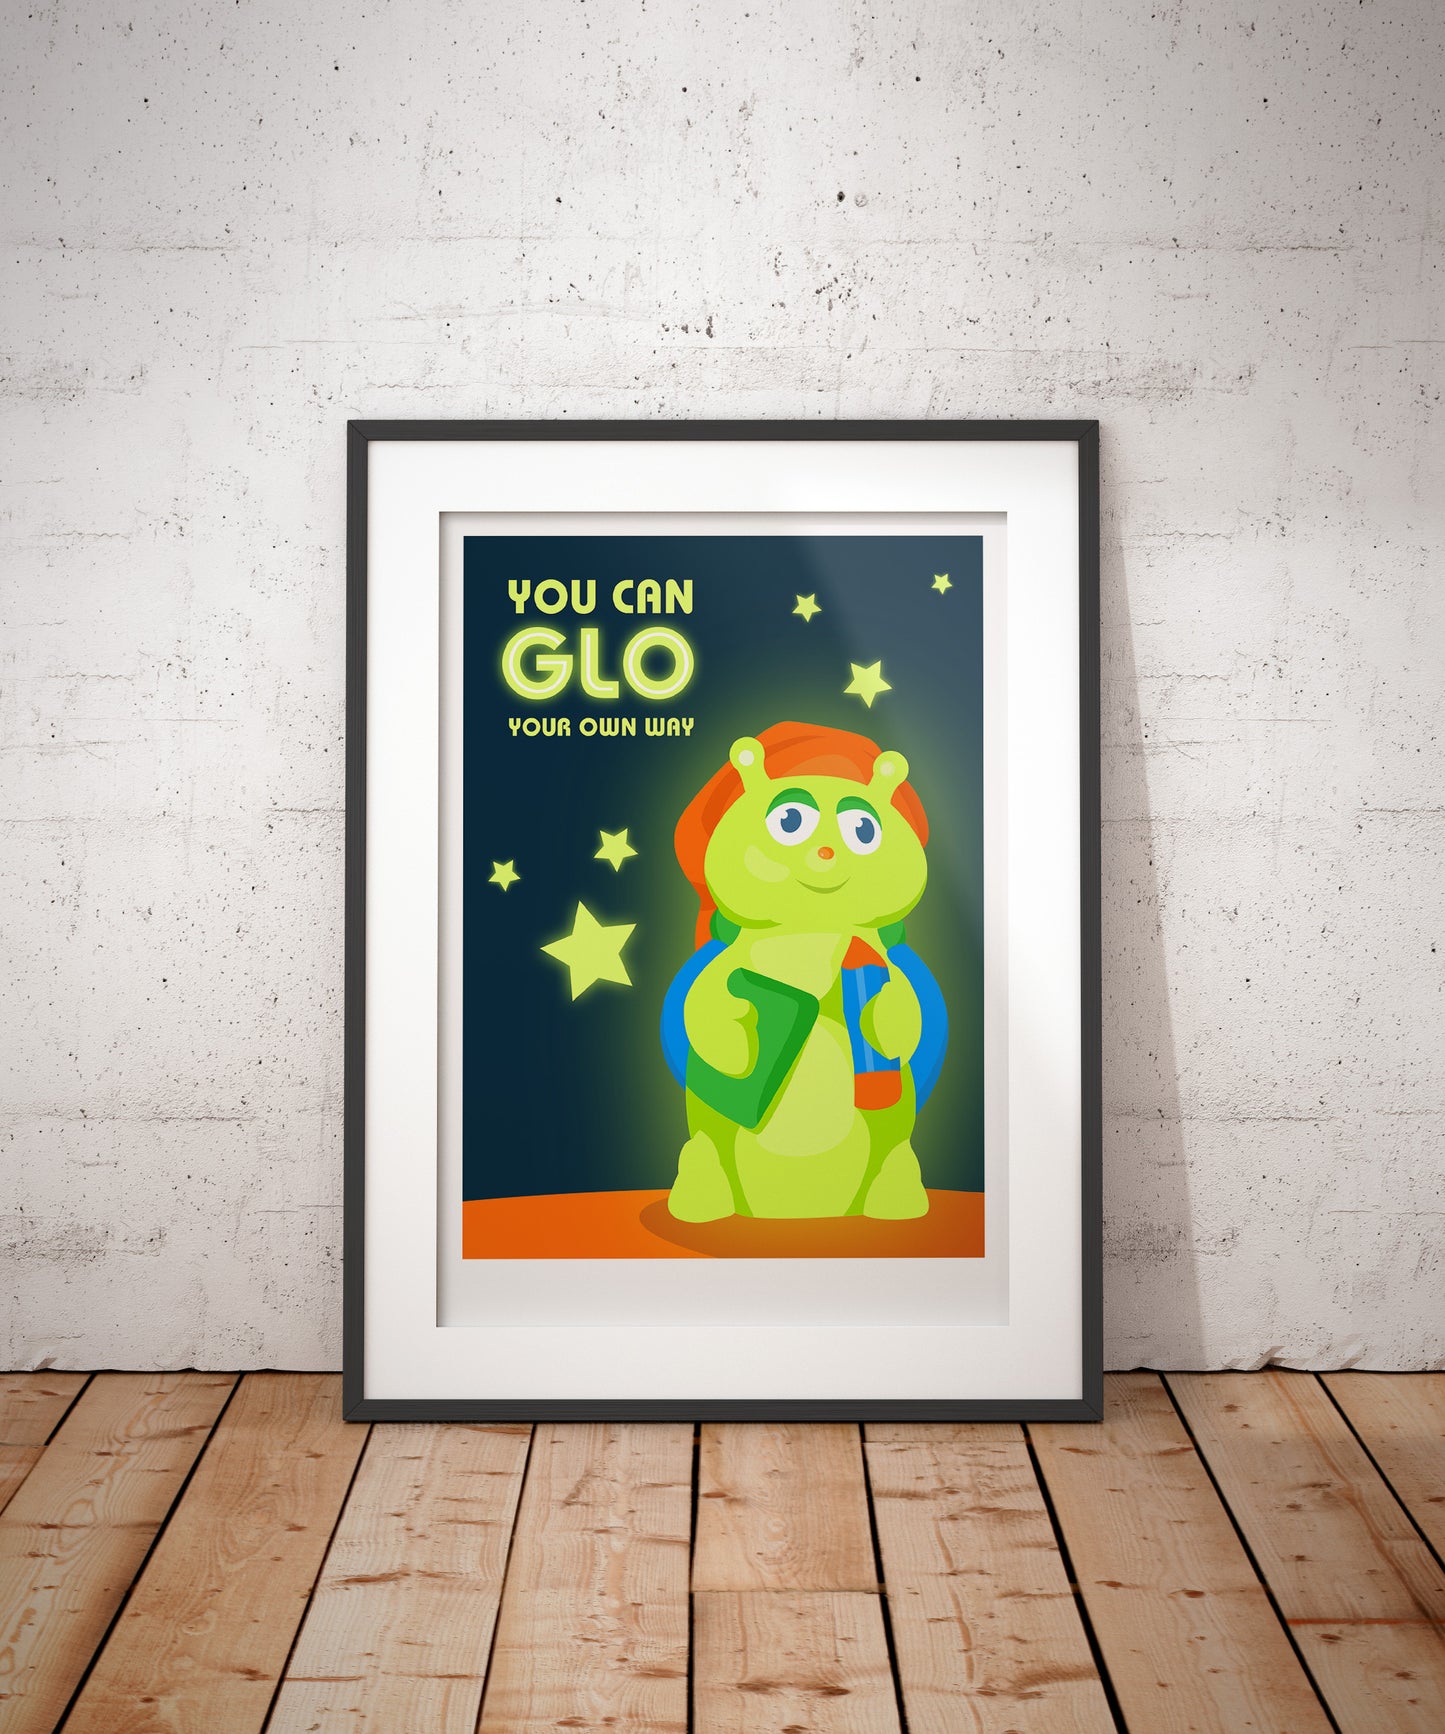 You can Glo your own way - Glo Friends / Glo Worm Art Print